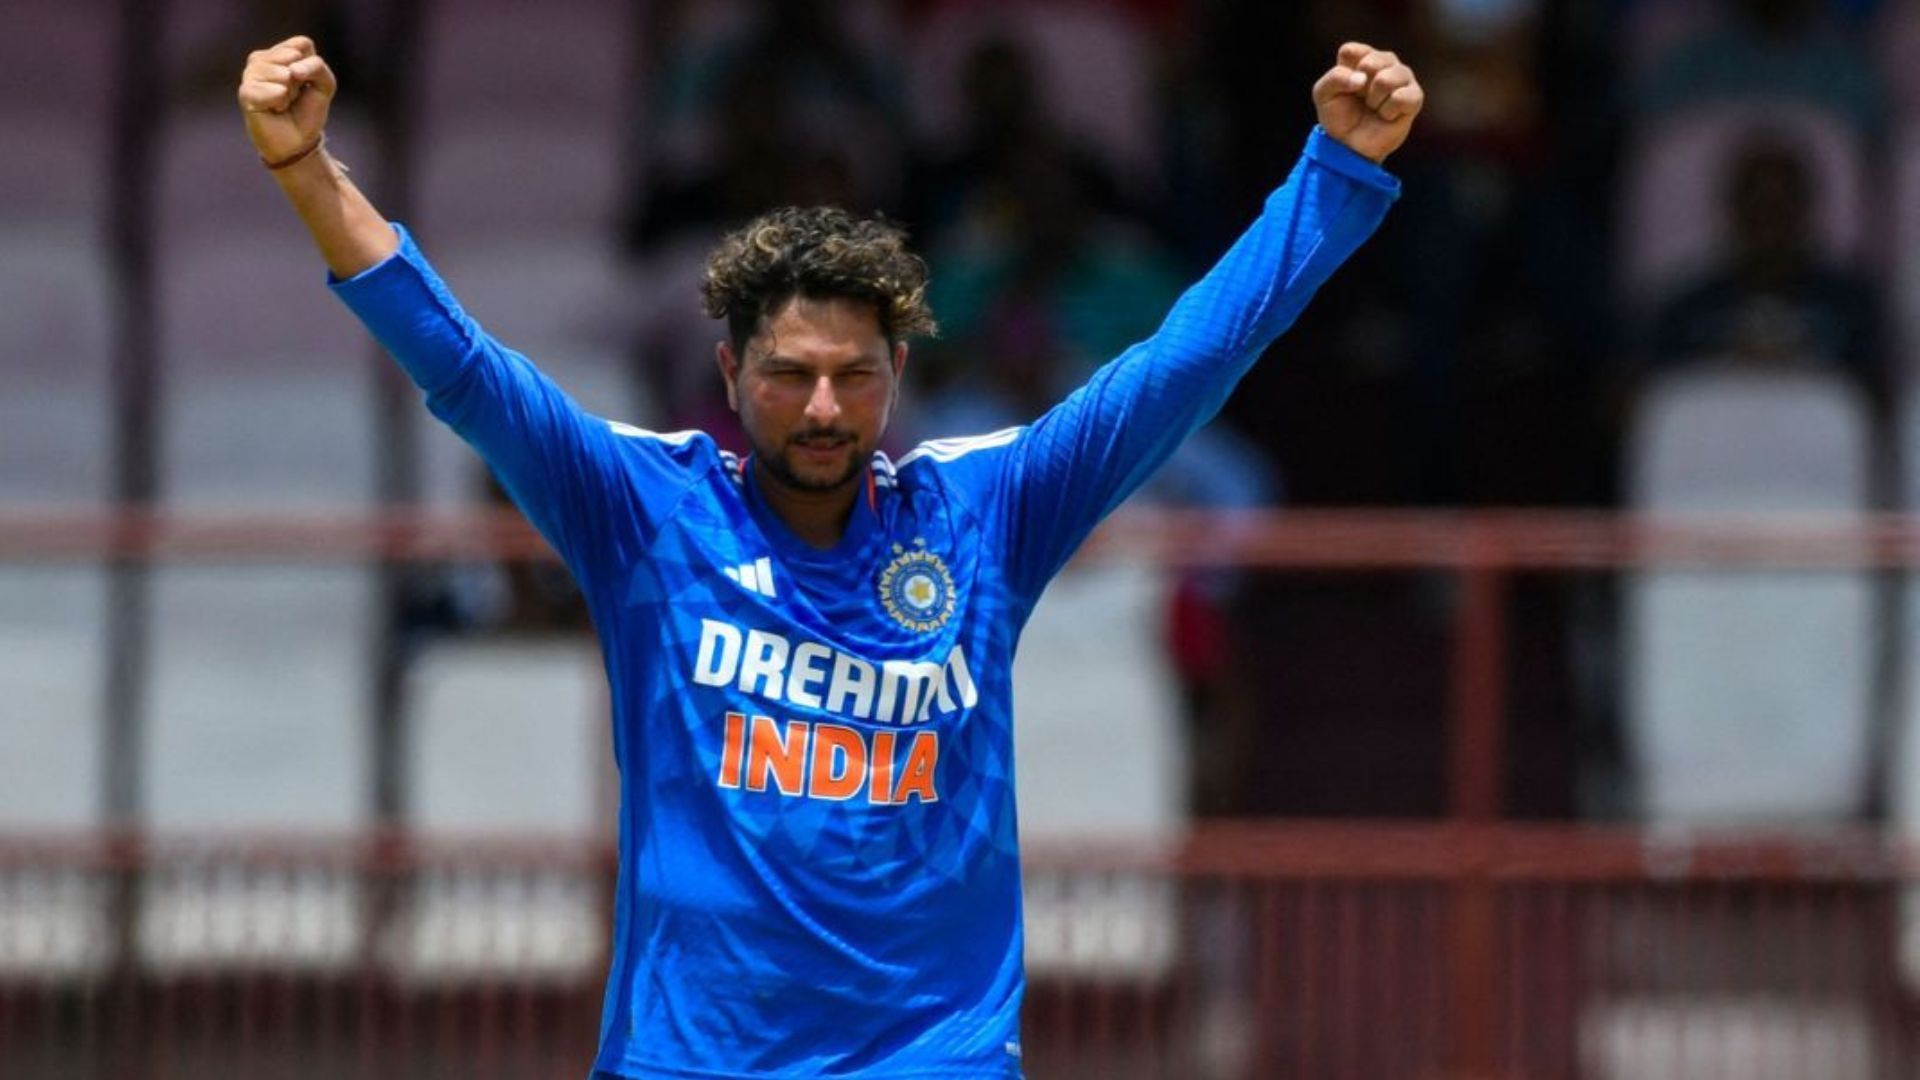 Kuldeep Yadav could turn out to be India